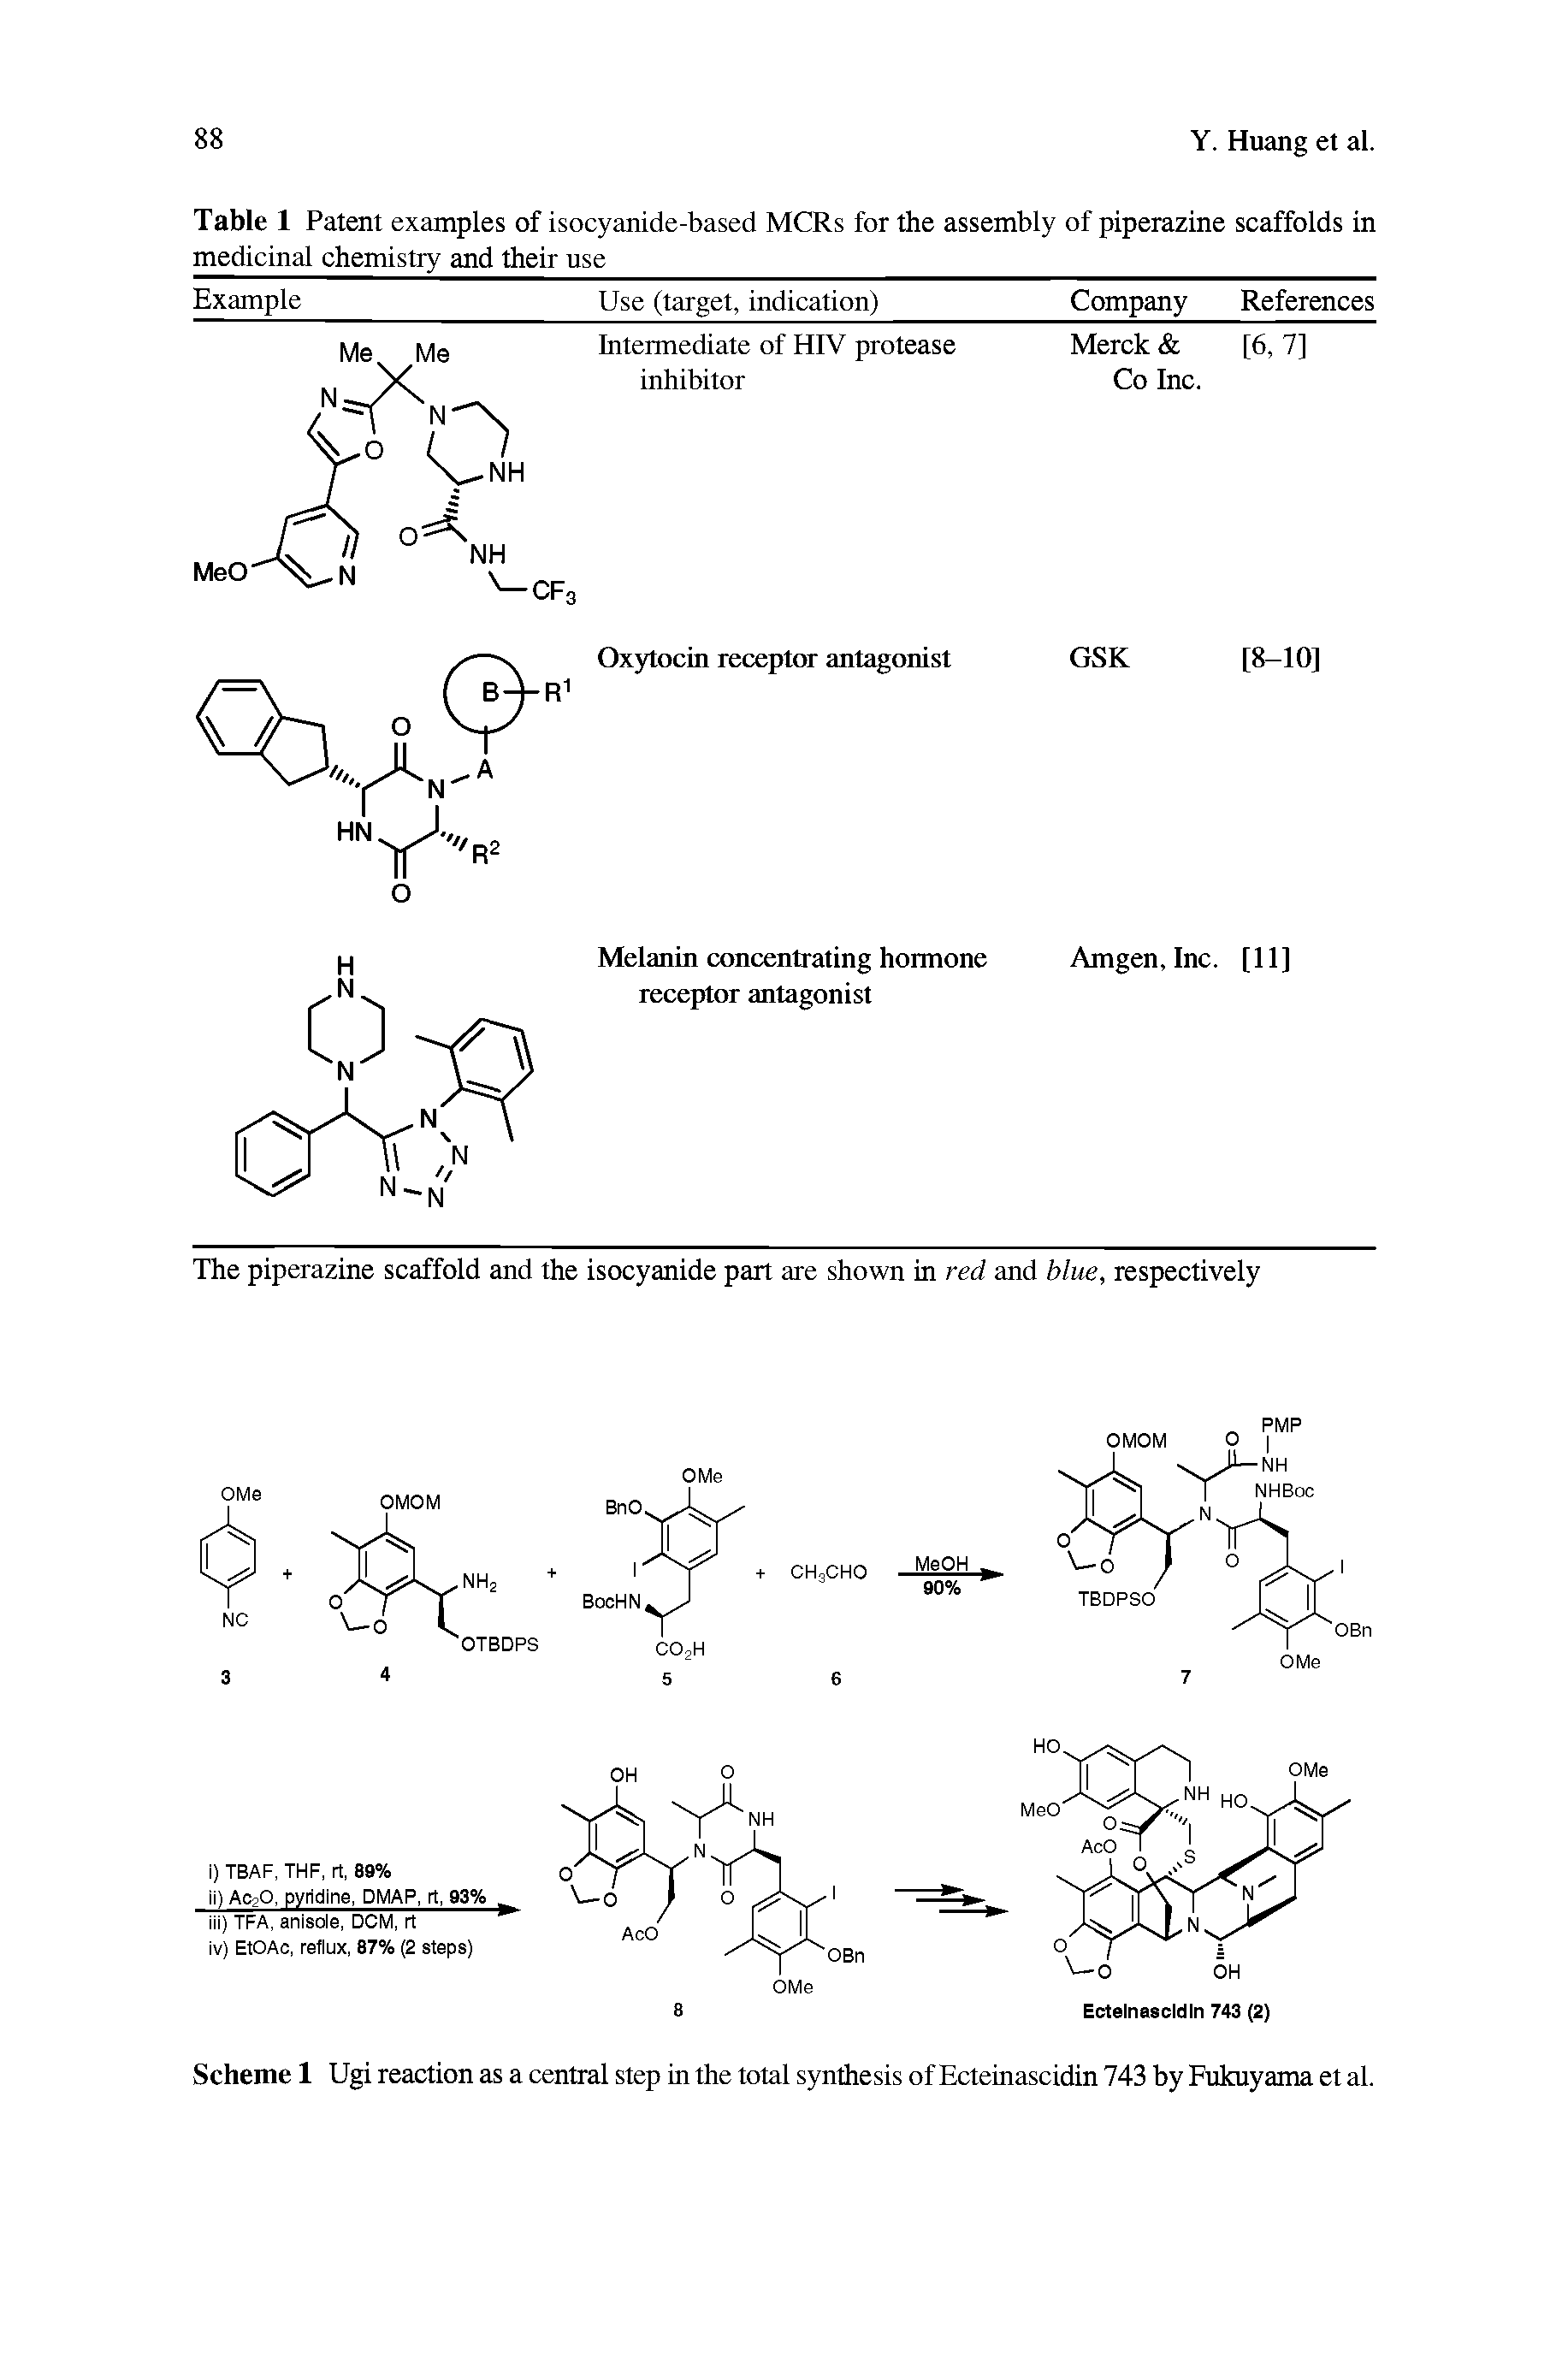 Scheme 1 Ugi reaction as a central step in the total synthesis of Ecteinascidin 743 by Fukuyama et al.